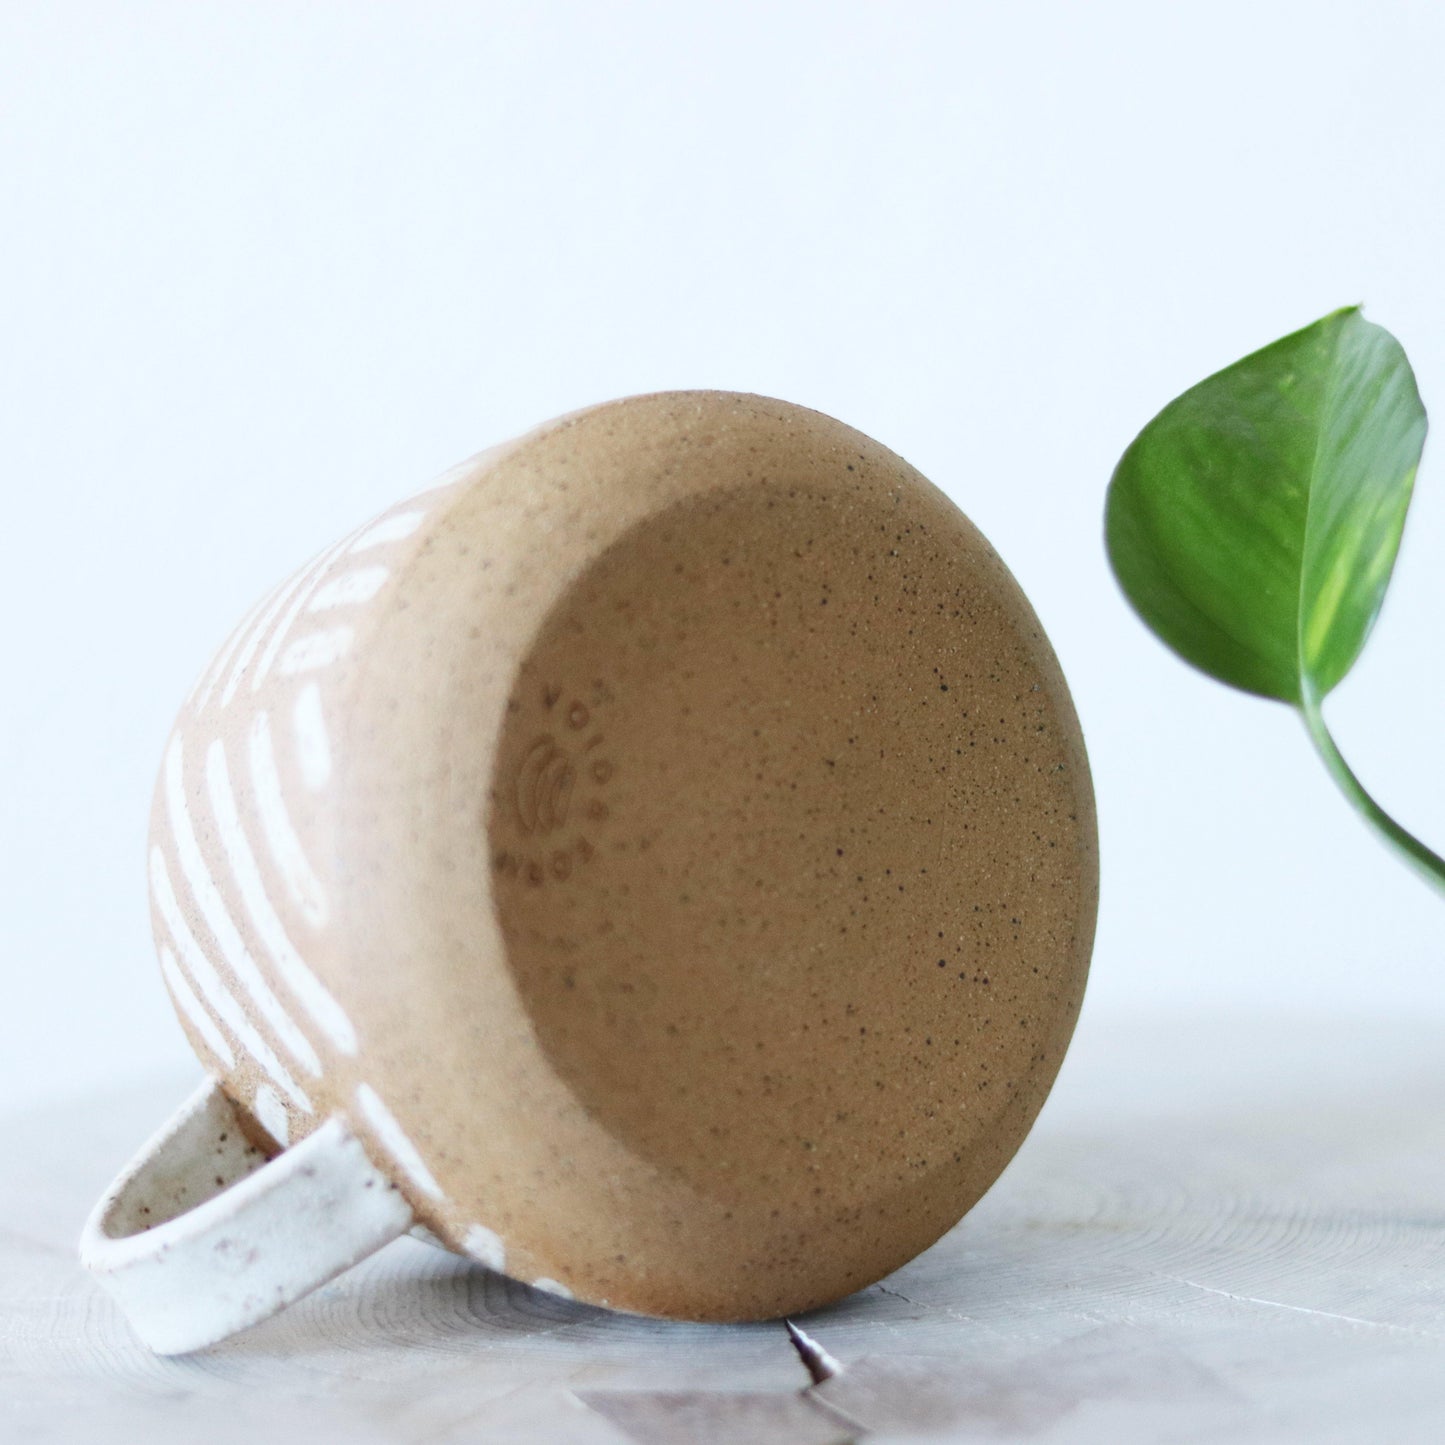 Handmade neutral mug with a speckled clay body and handpainted lines. Made by void and form ceramics.